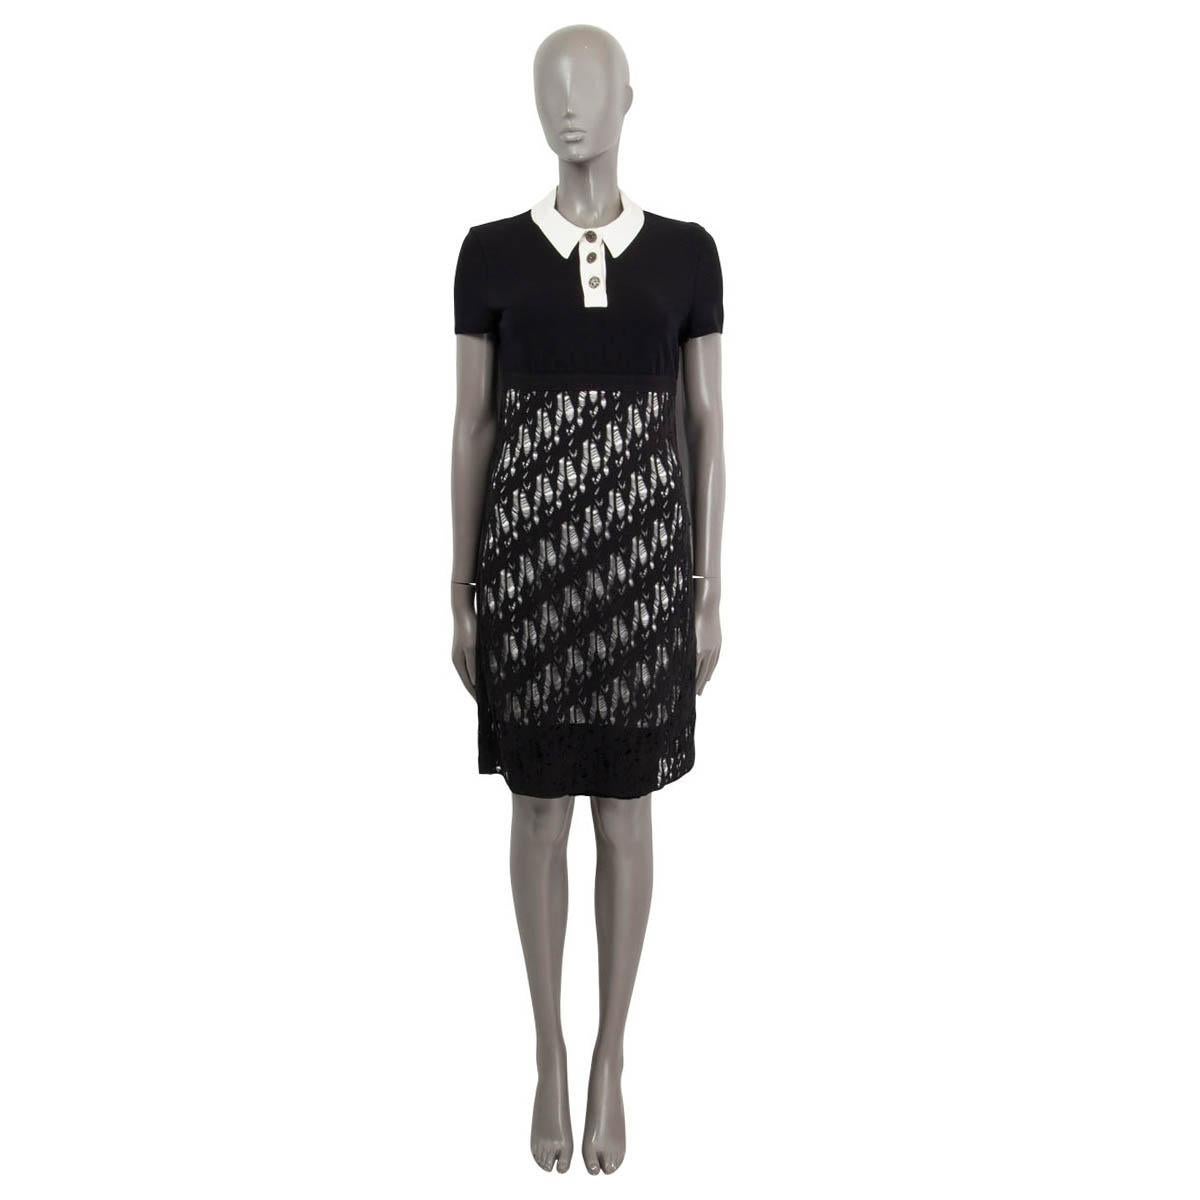 100% authentic Chanel knit dress in black and white cotton (33%), viscose (30%), nylon (20%) and polyester (17%). Features a collared collar with three buttons, short sleeves and a distressed knit overlay at the skirt. Closes with a concealed zipper